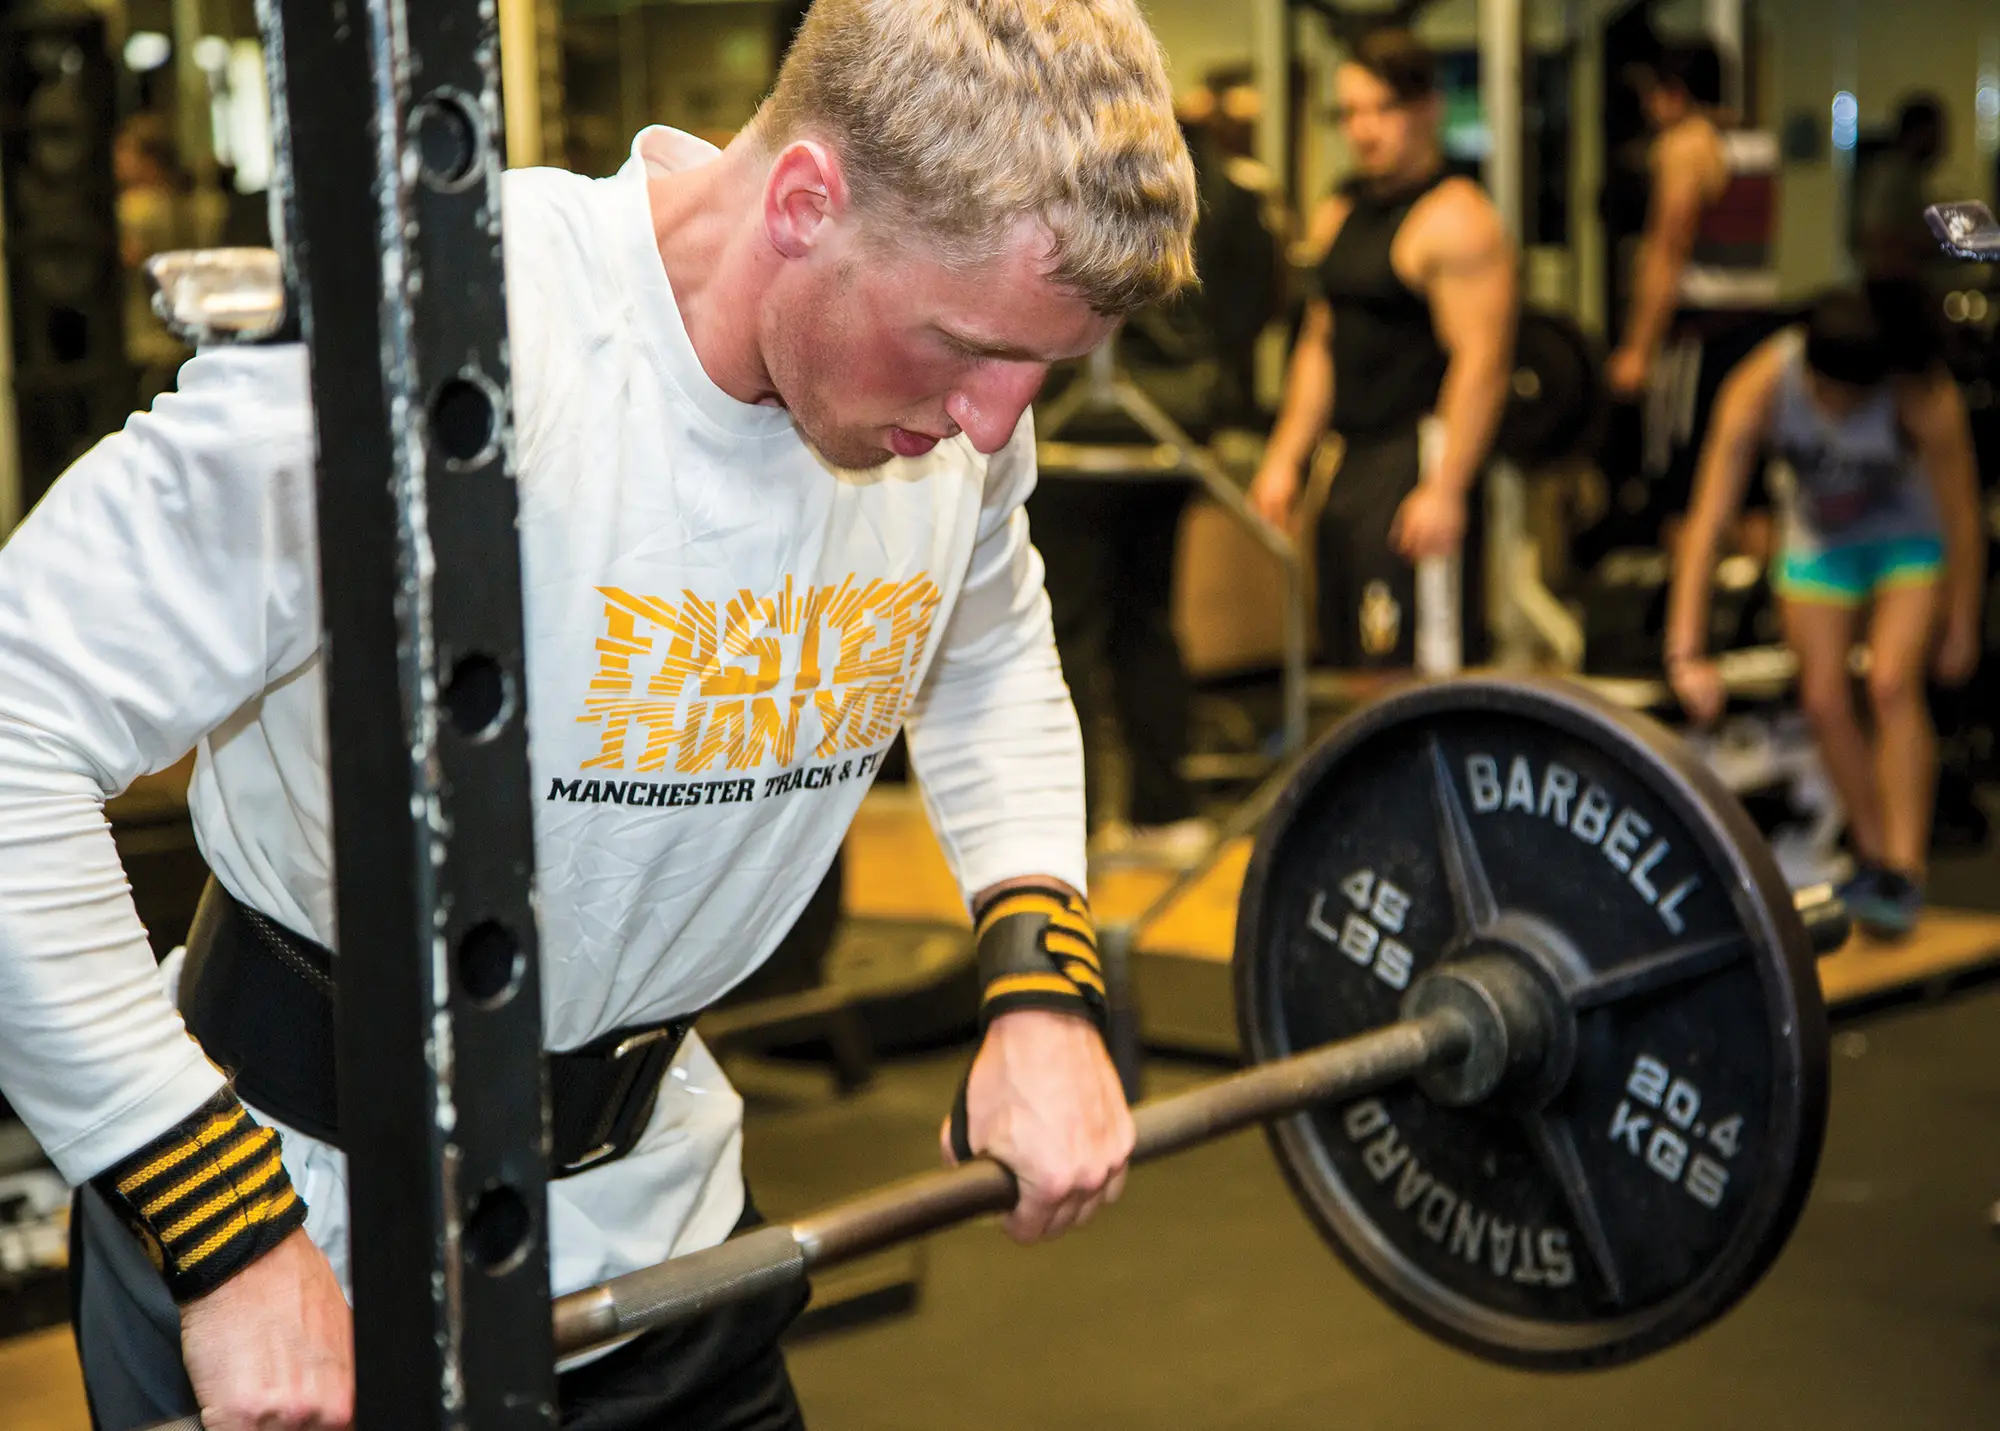 Student in gray shirt and yellow writing lifting large weight